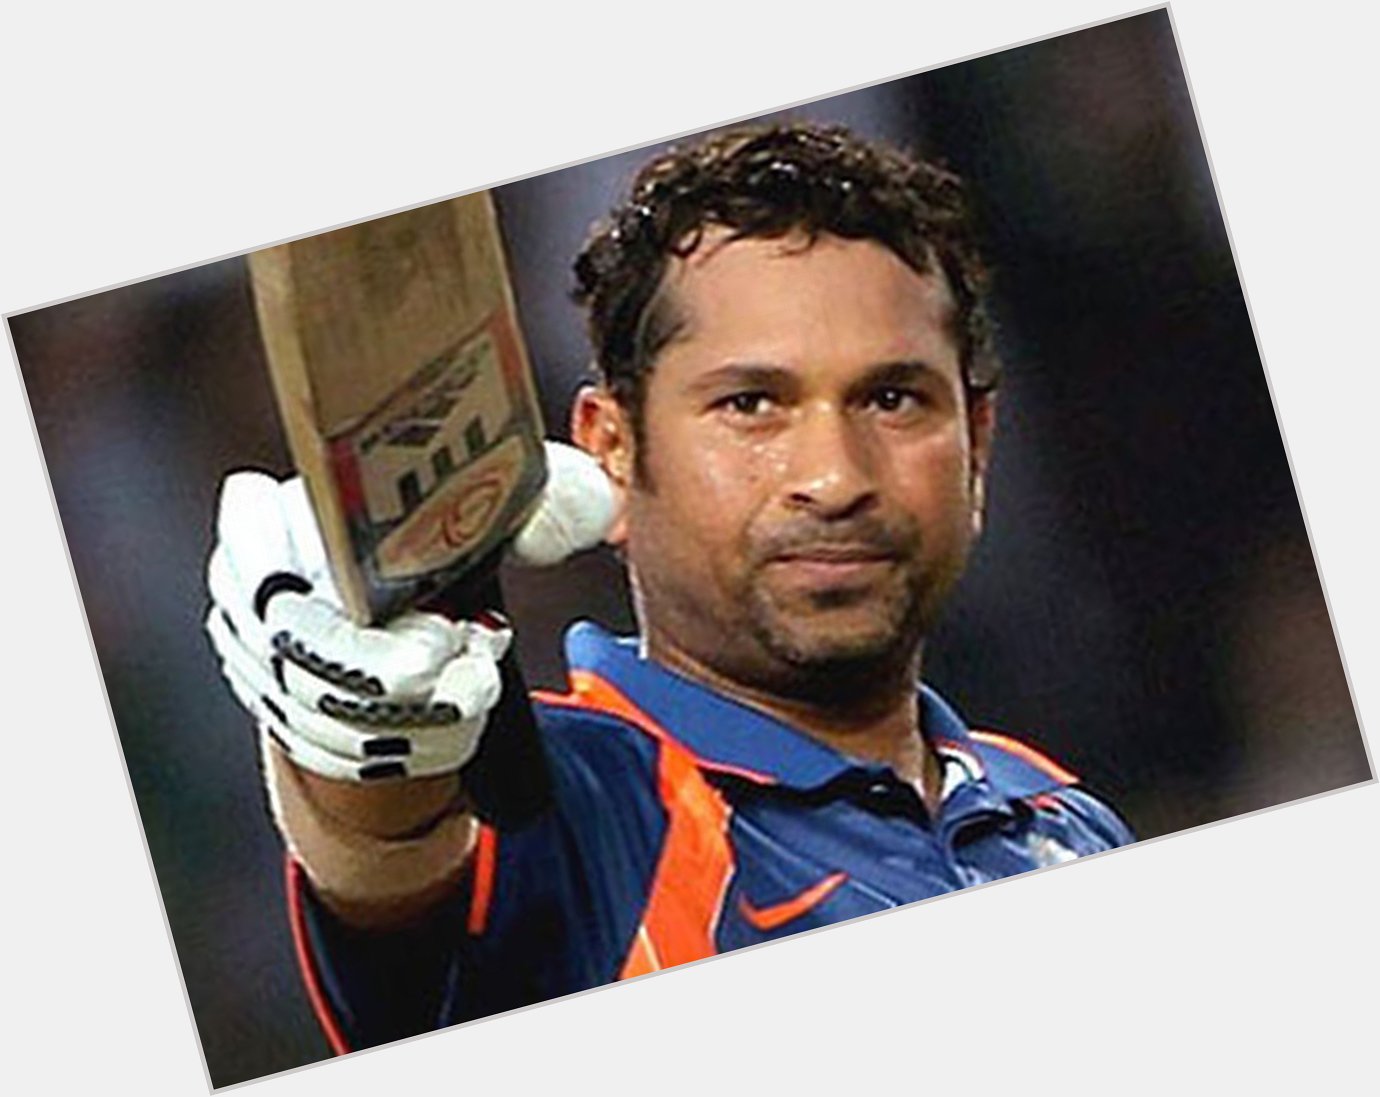 Happy 42nd birthday to the one and only Sachin Tendulkar! Congratulations 